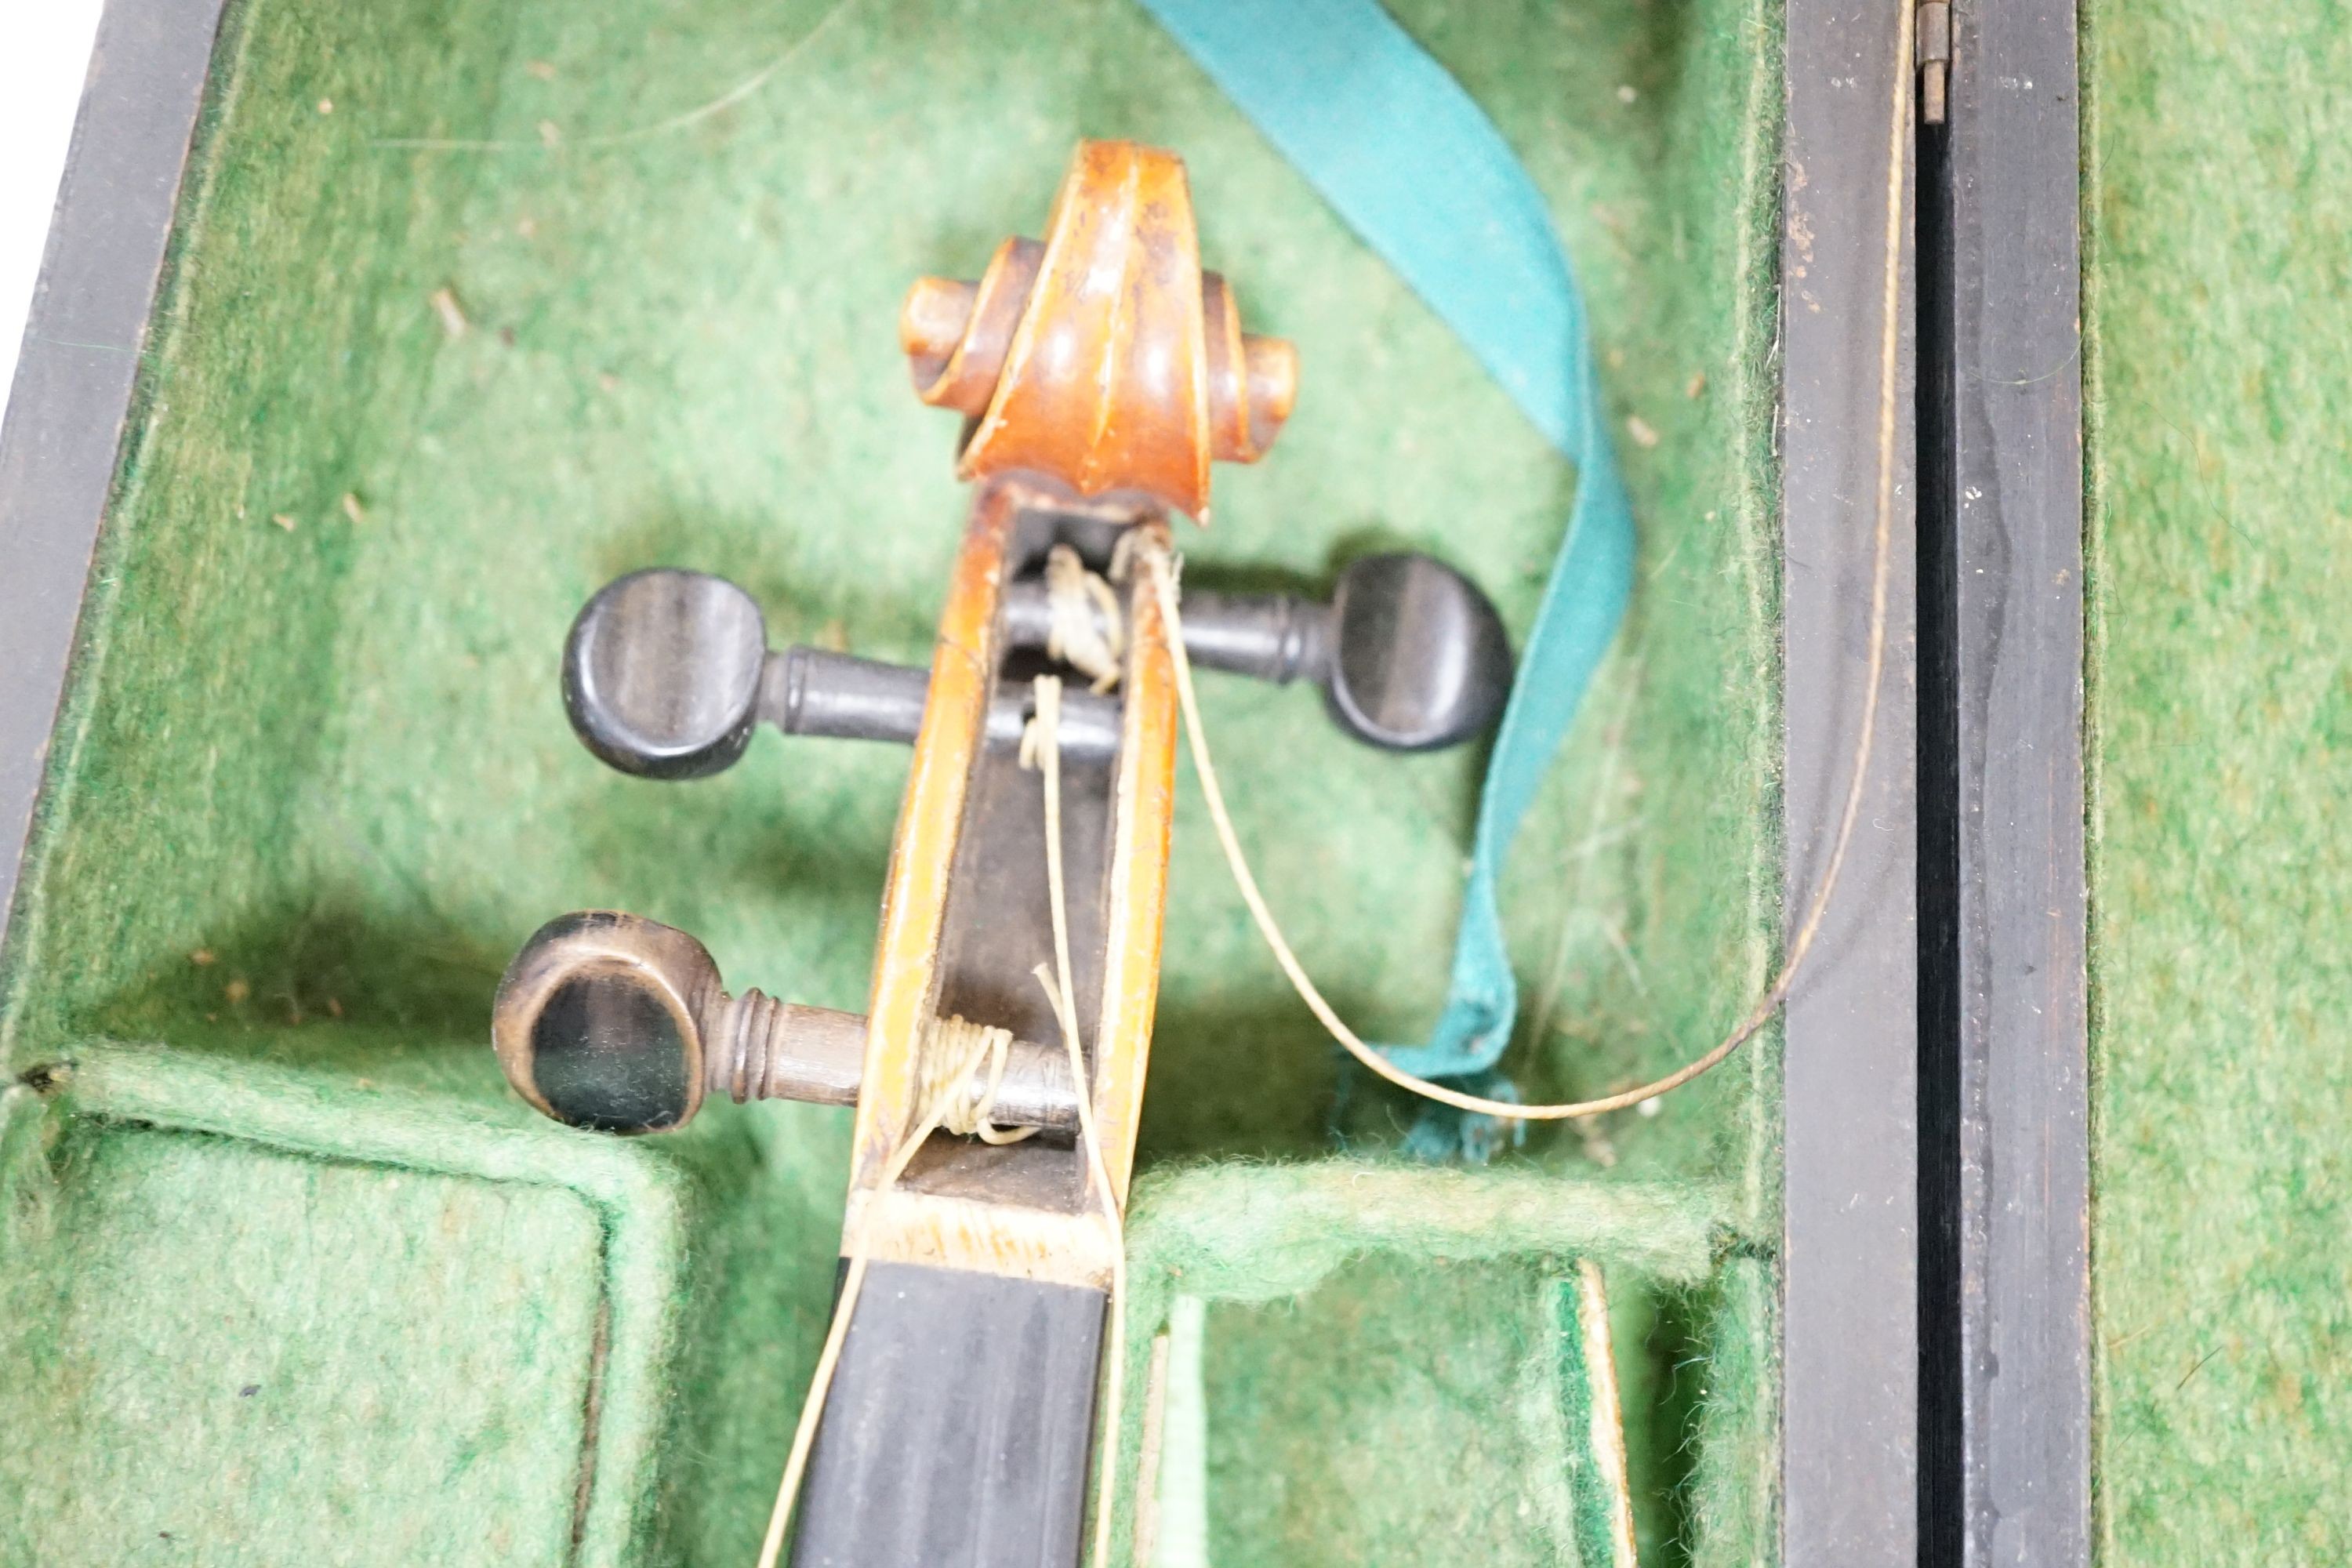 A 19th century 3/4 size violin, cased with 2 bows and 1 other German violin